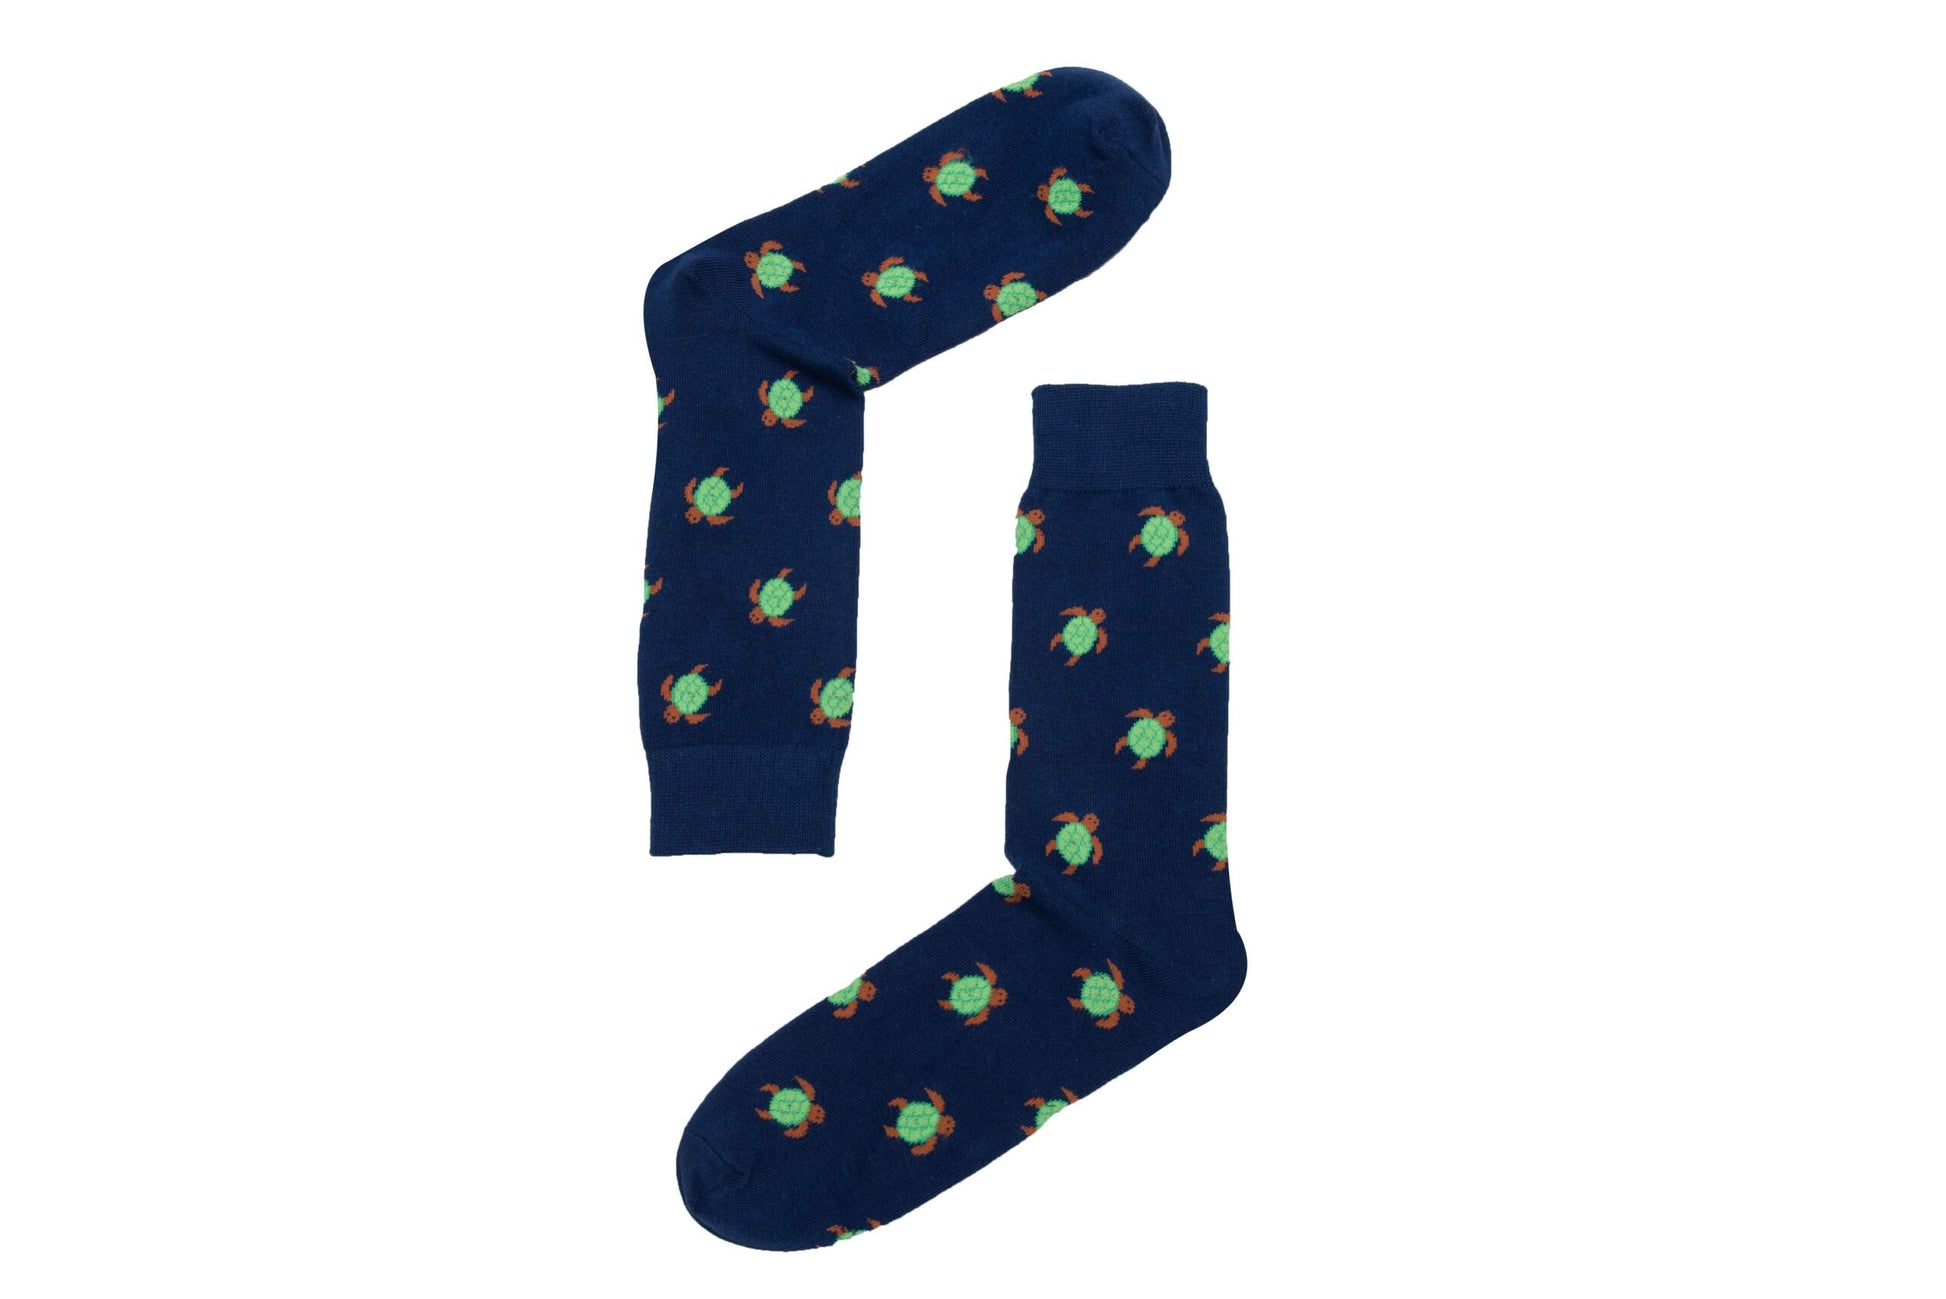 A pair of navy socks with a Green Turtle on them.